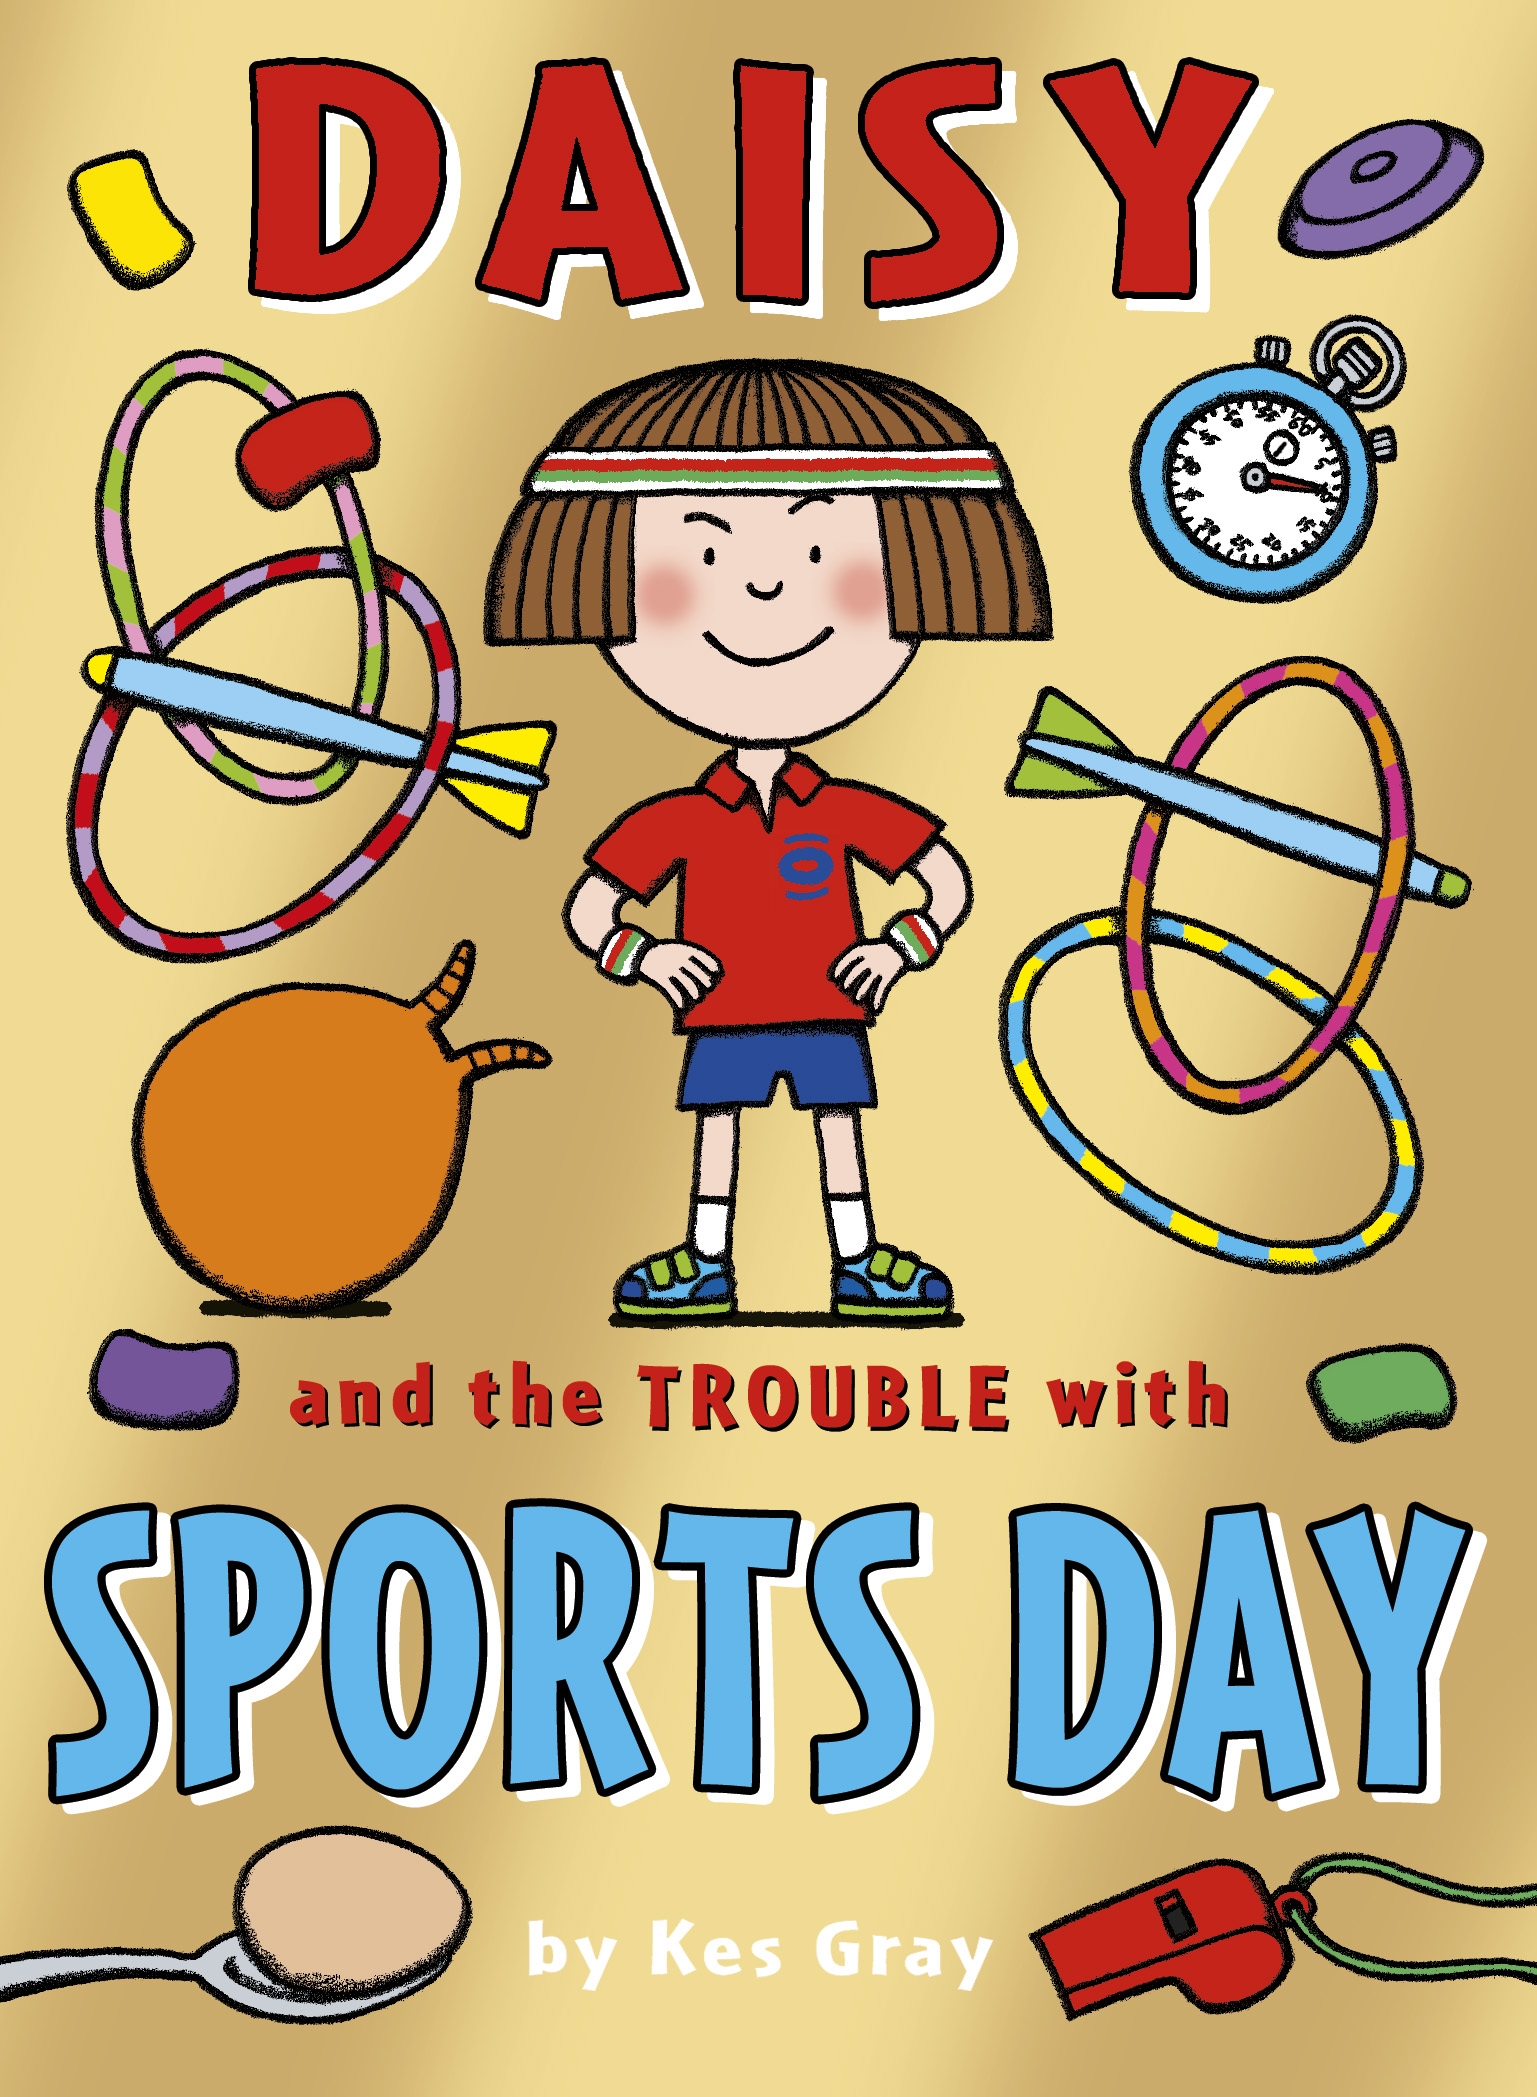 Daisy and the Trouble with Sports Day by Kes Gray - Penguin Books Australia